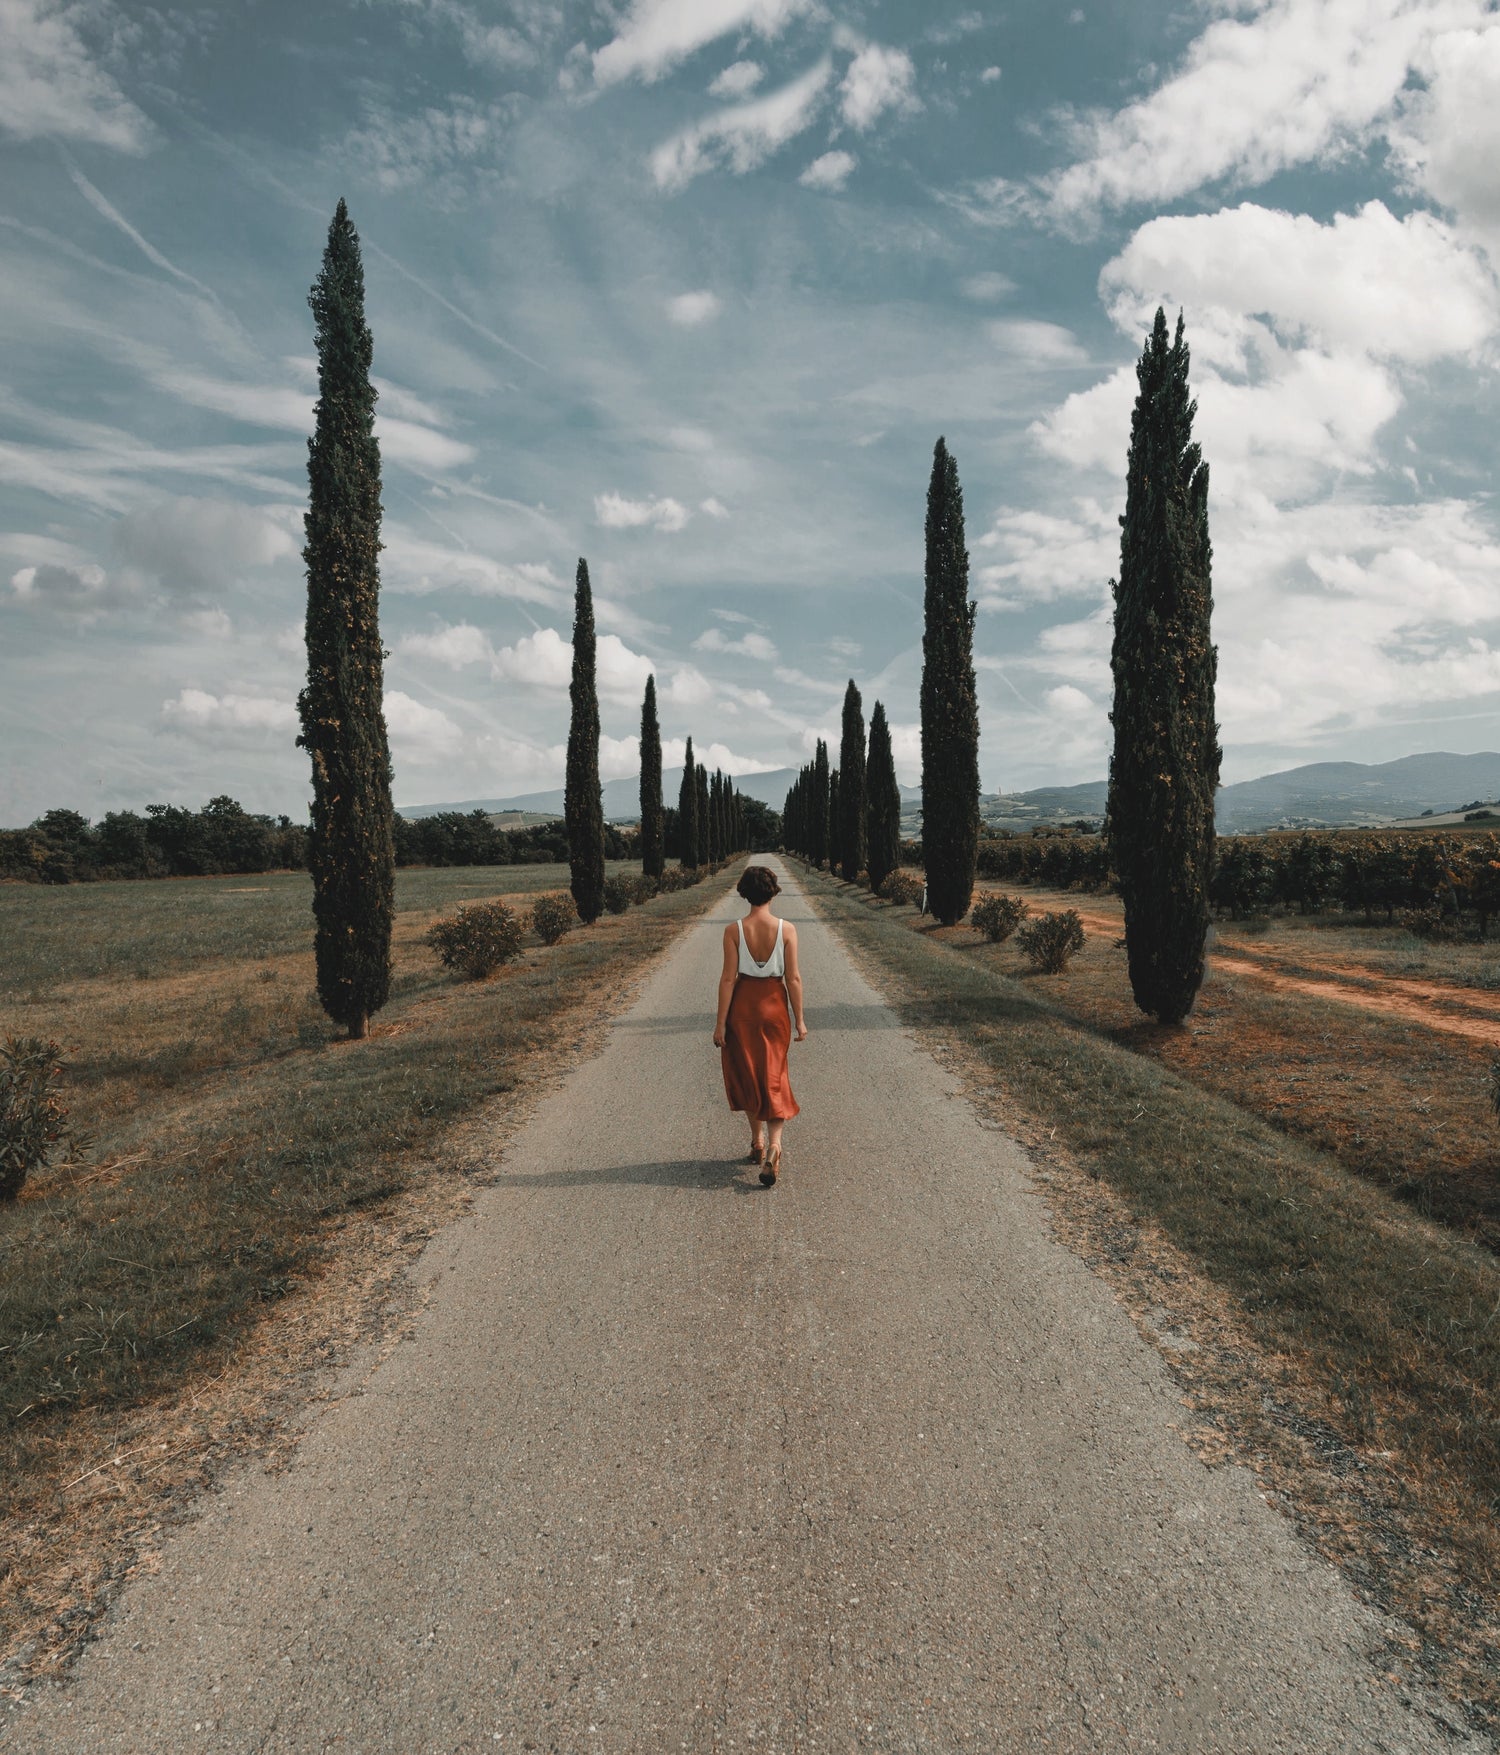 Woman walking down road with trees and sky